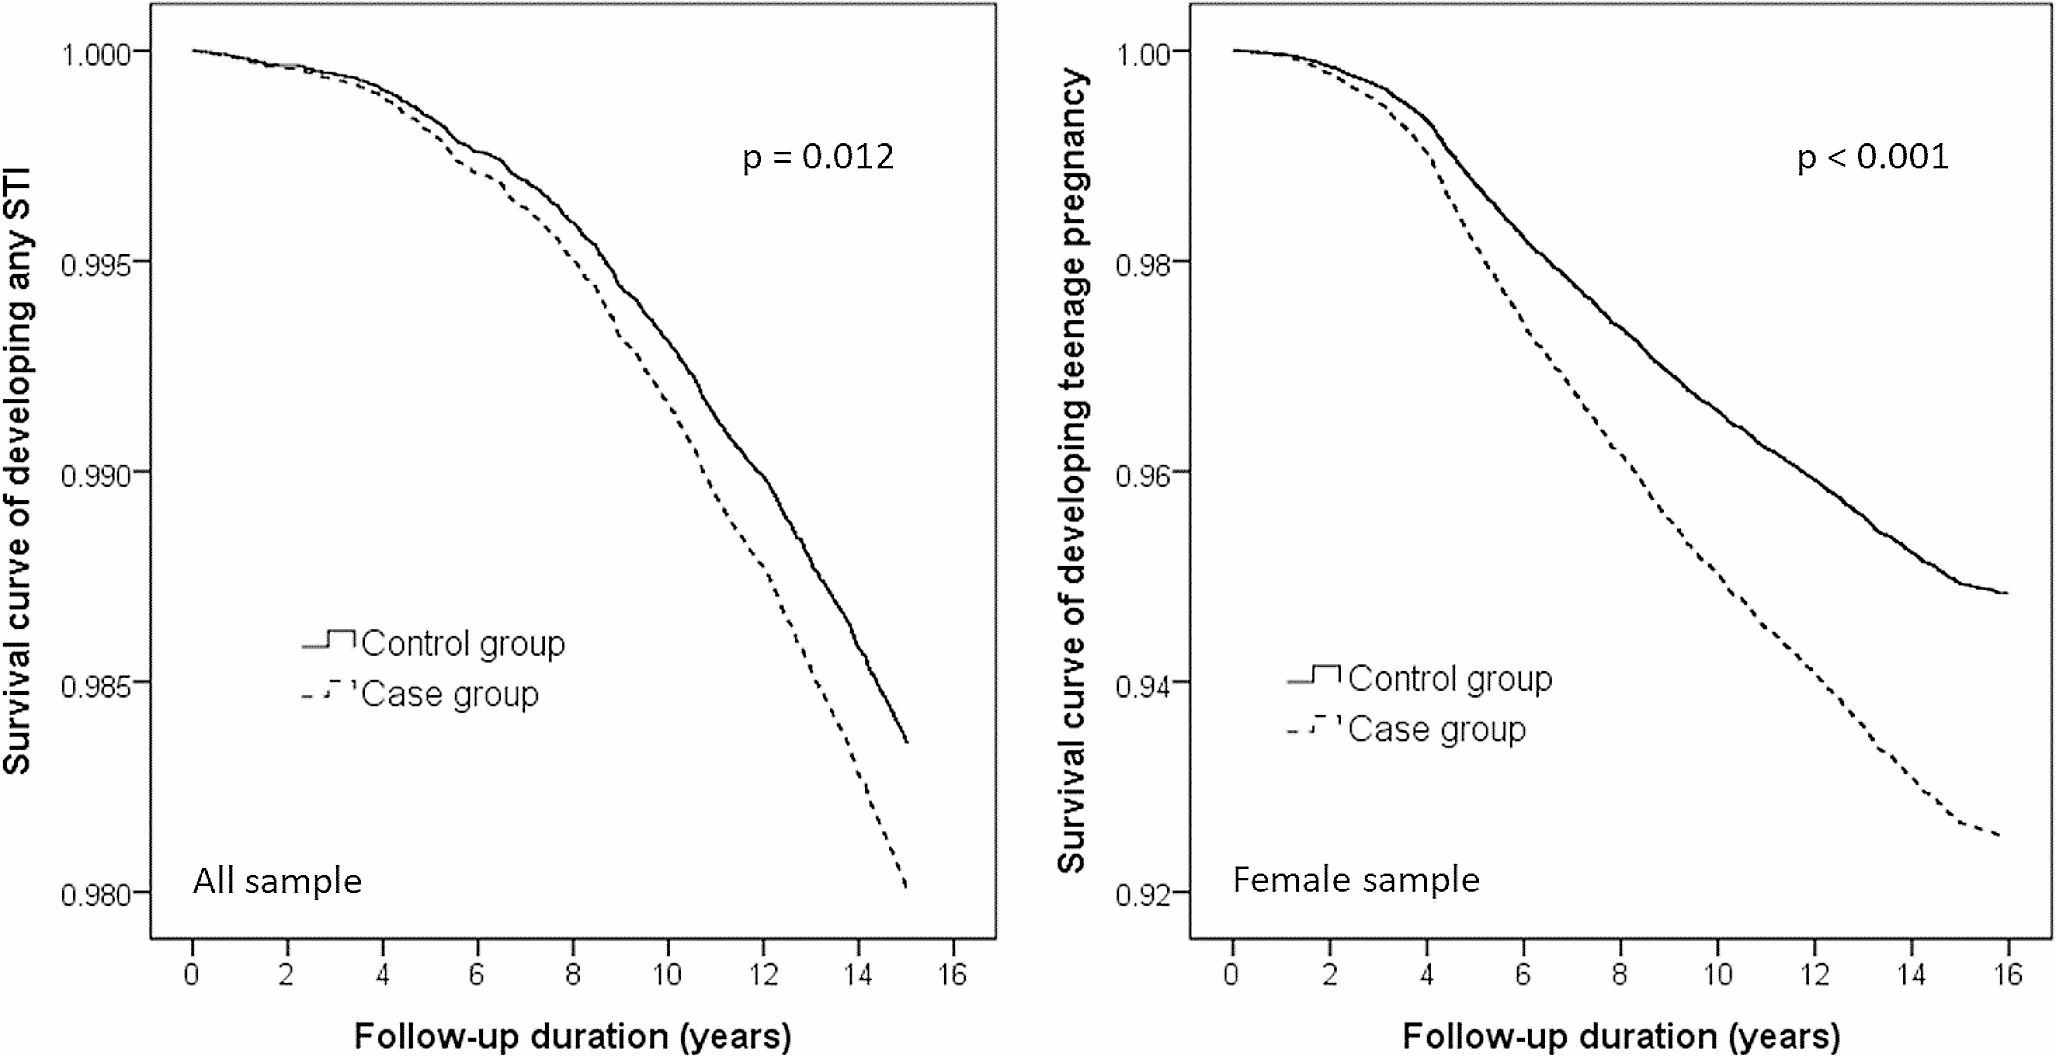 Sexually transmitted infection and teenage pregnancy in adolescents having parents with schizophrenia: a retrospective cohort study of 64,350 participants